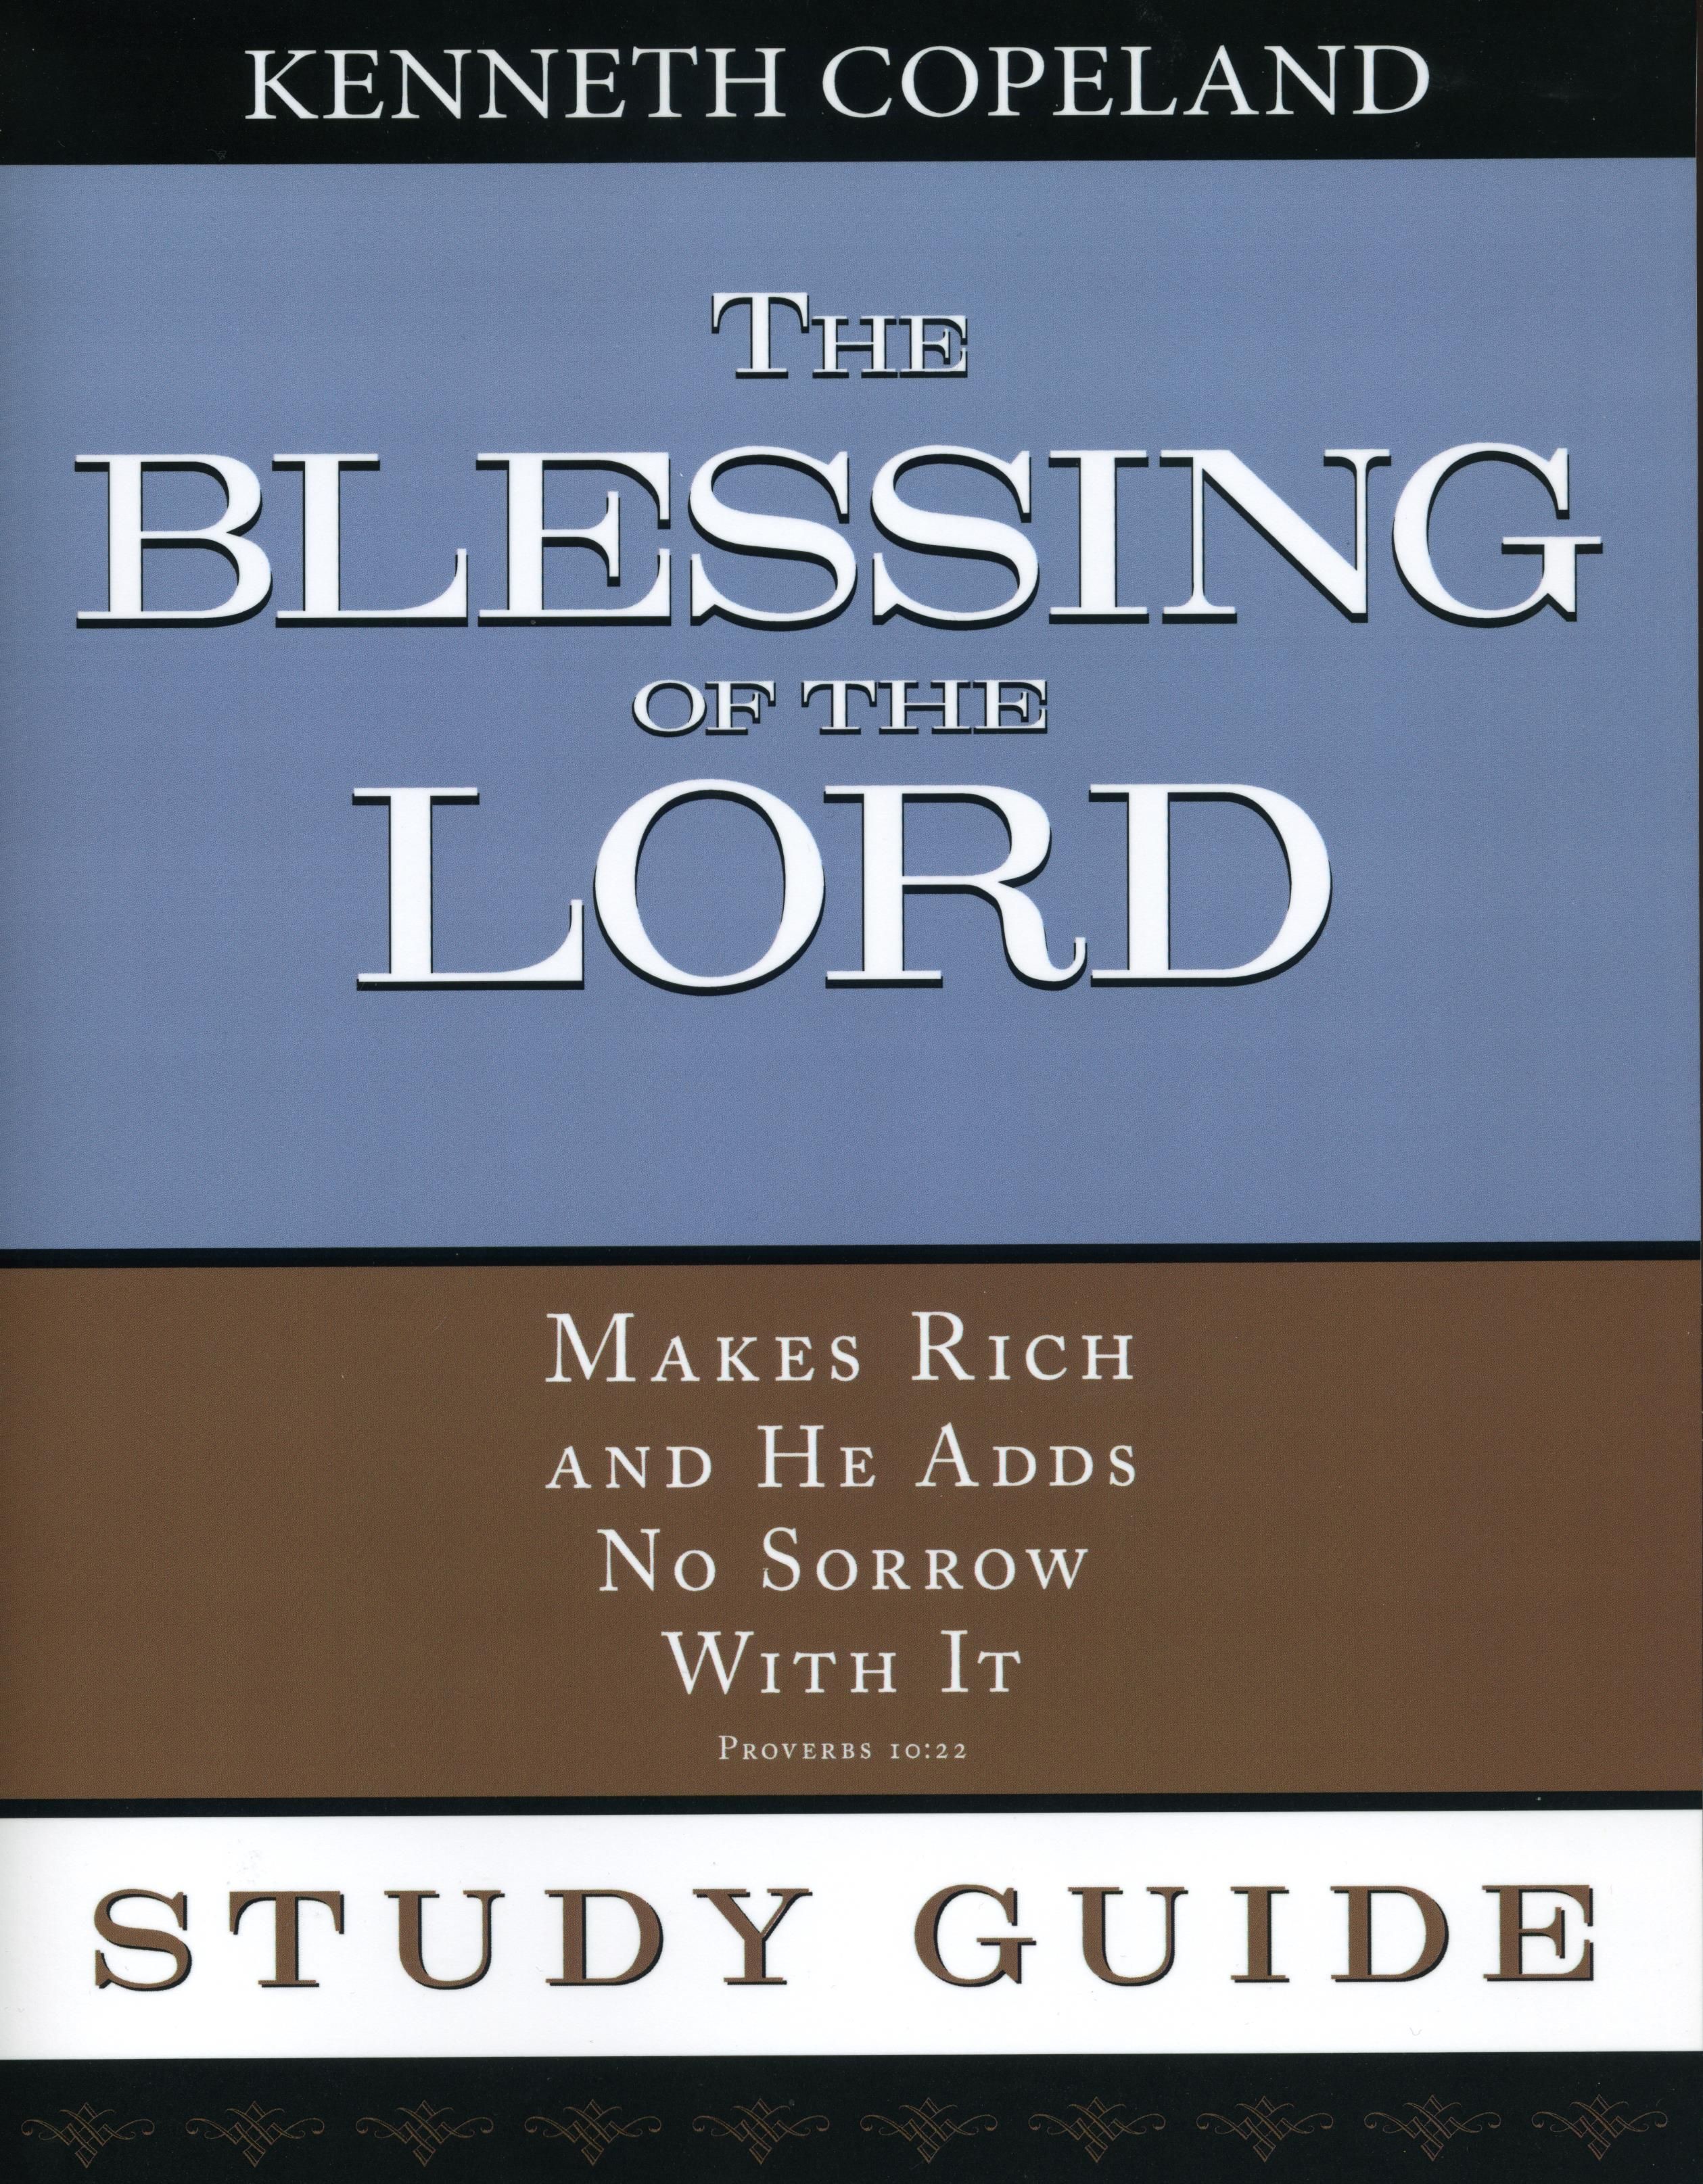 Englische Bücher - K. Copeland: The Blessing of the Lord (Study-Guide)